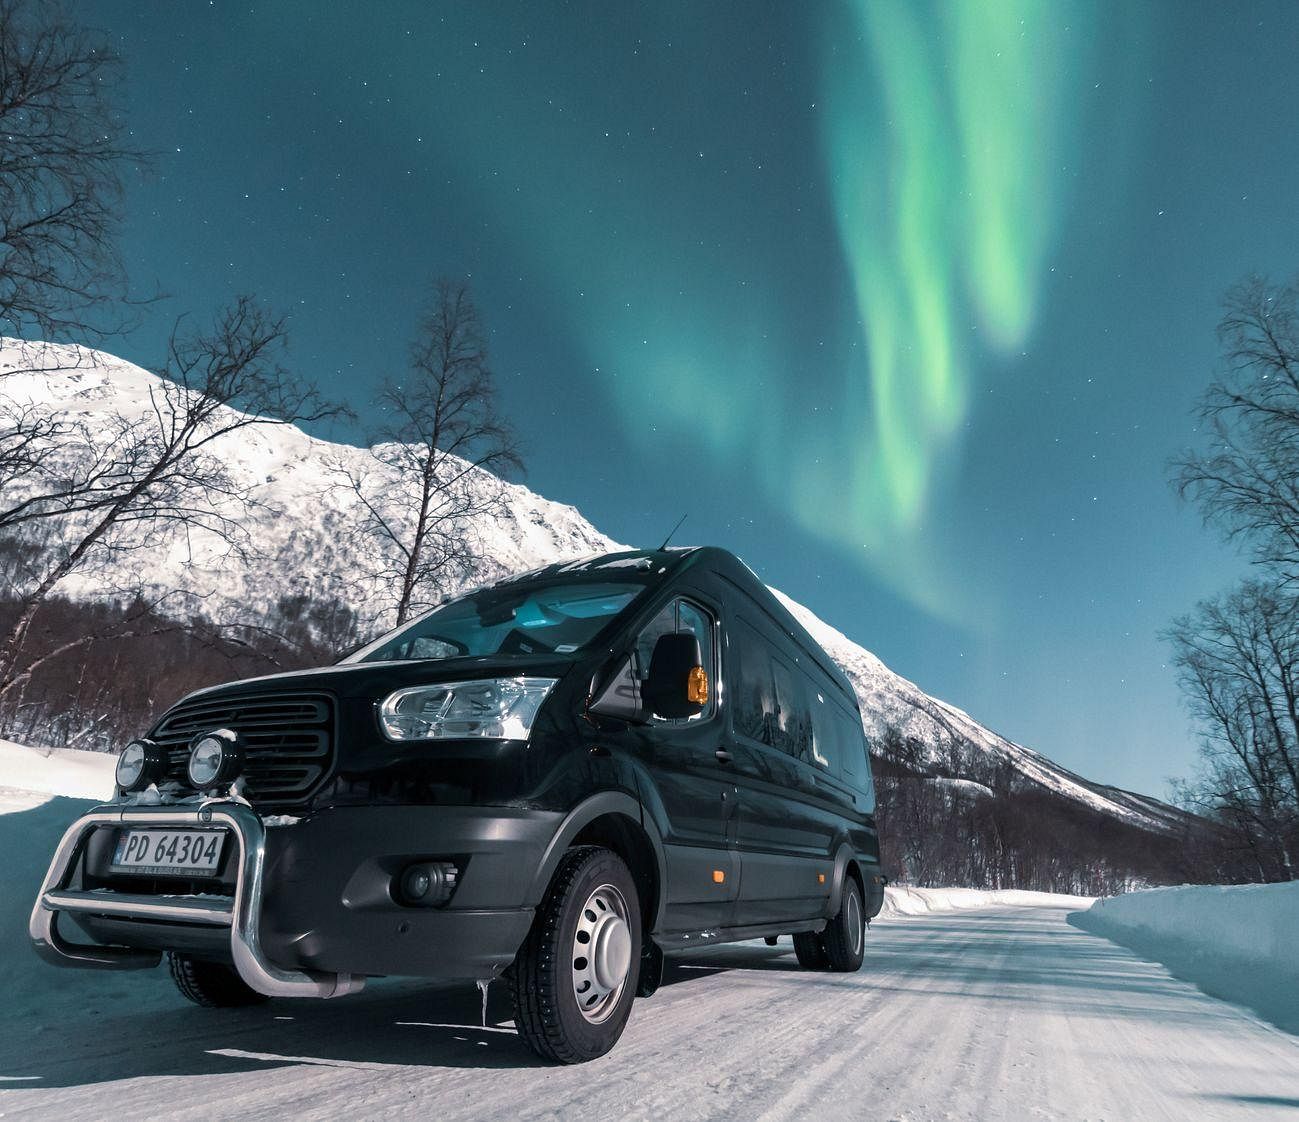 Van chasing the northern lights in Tromso Norway on a small group trip.